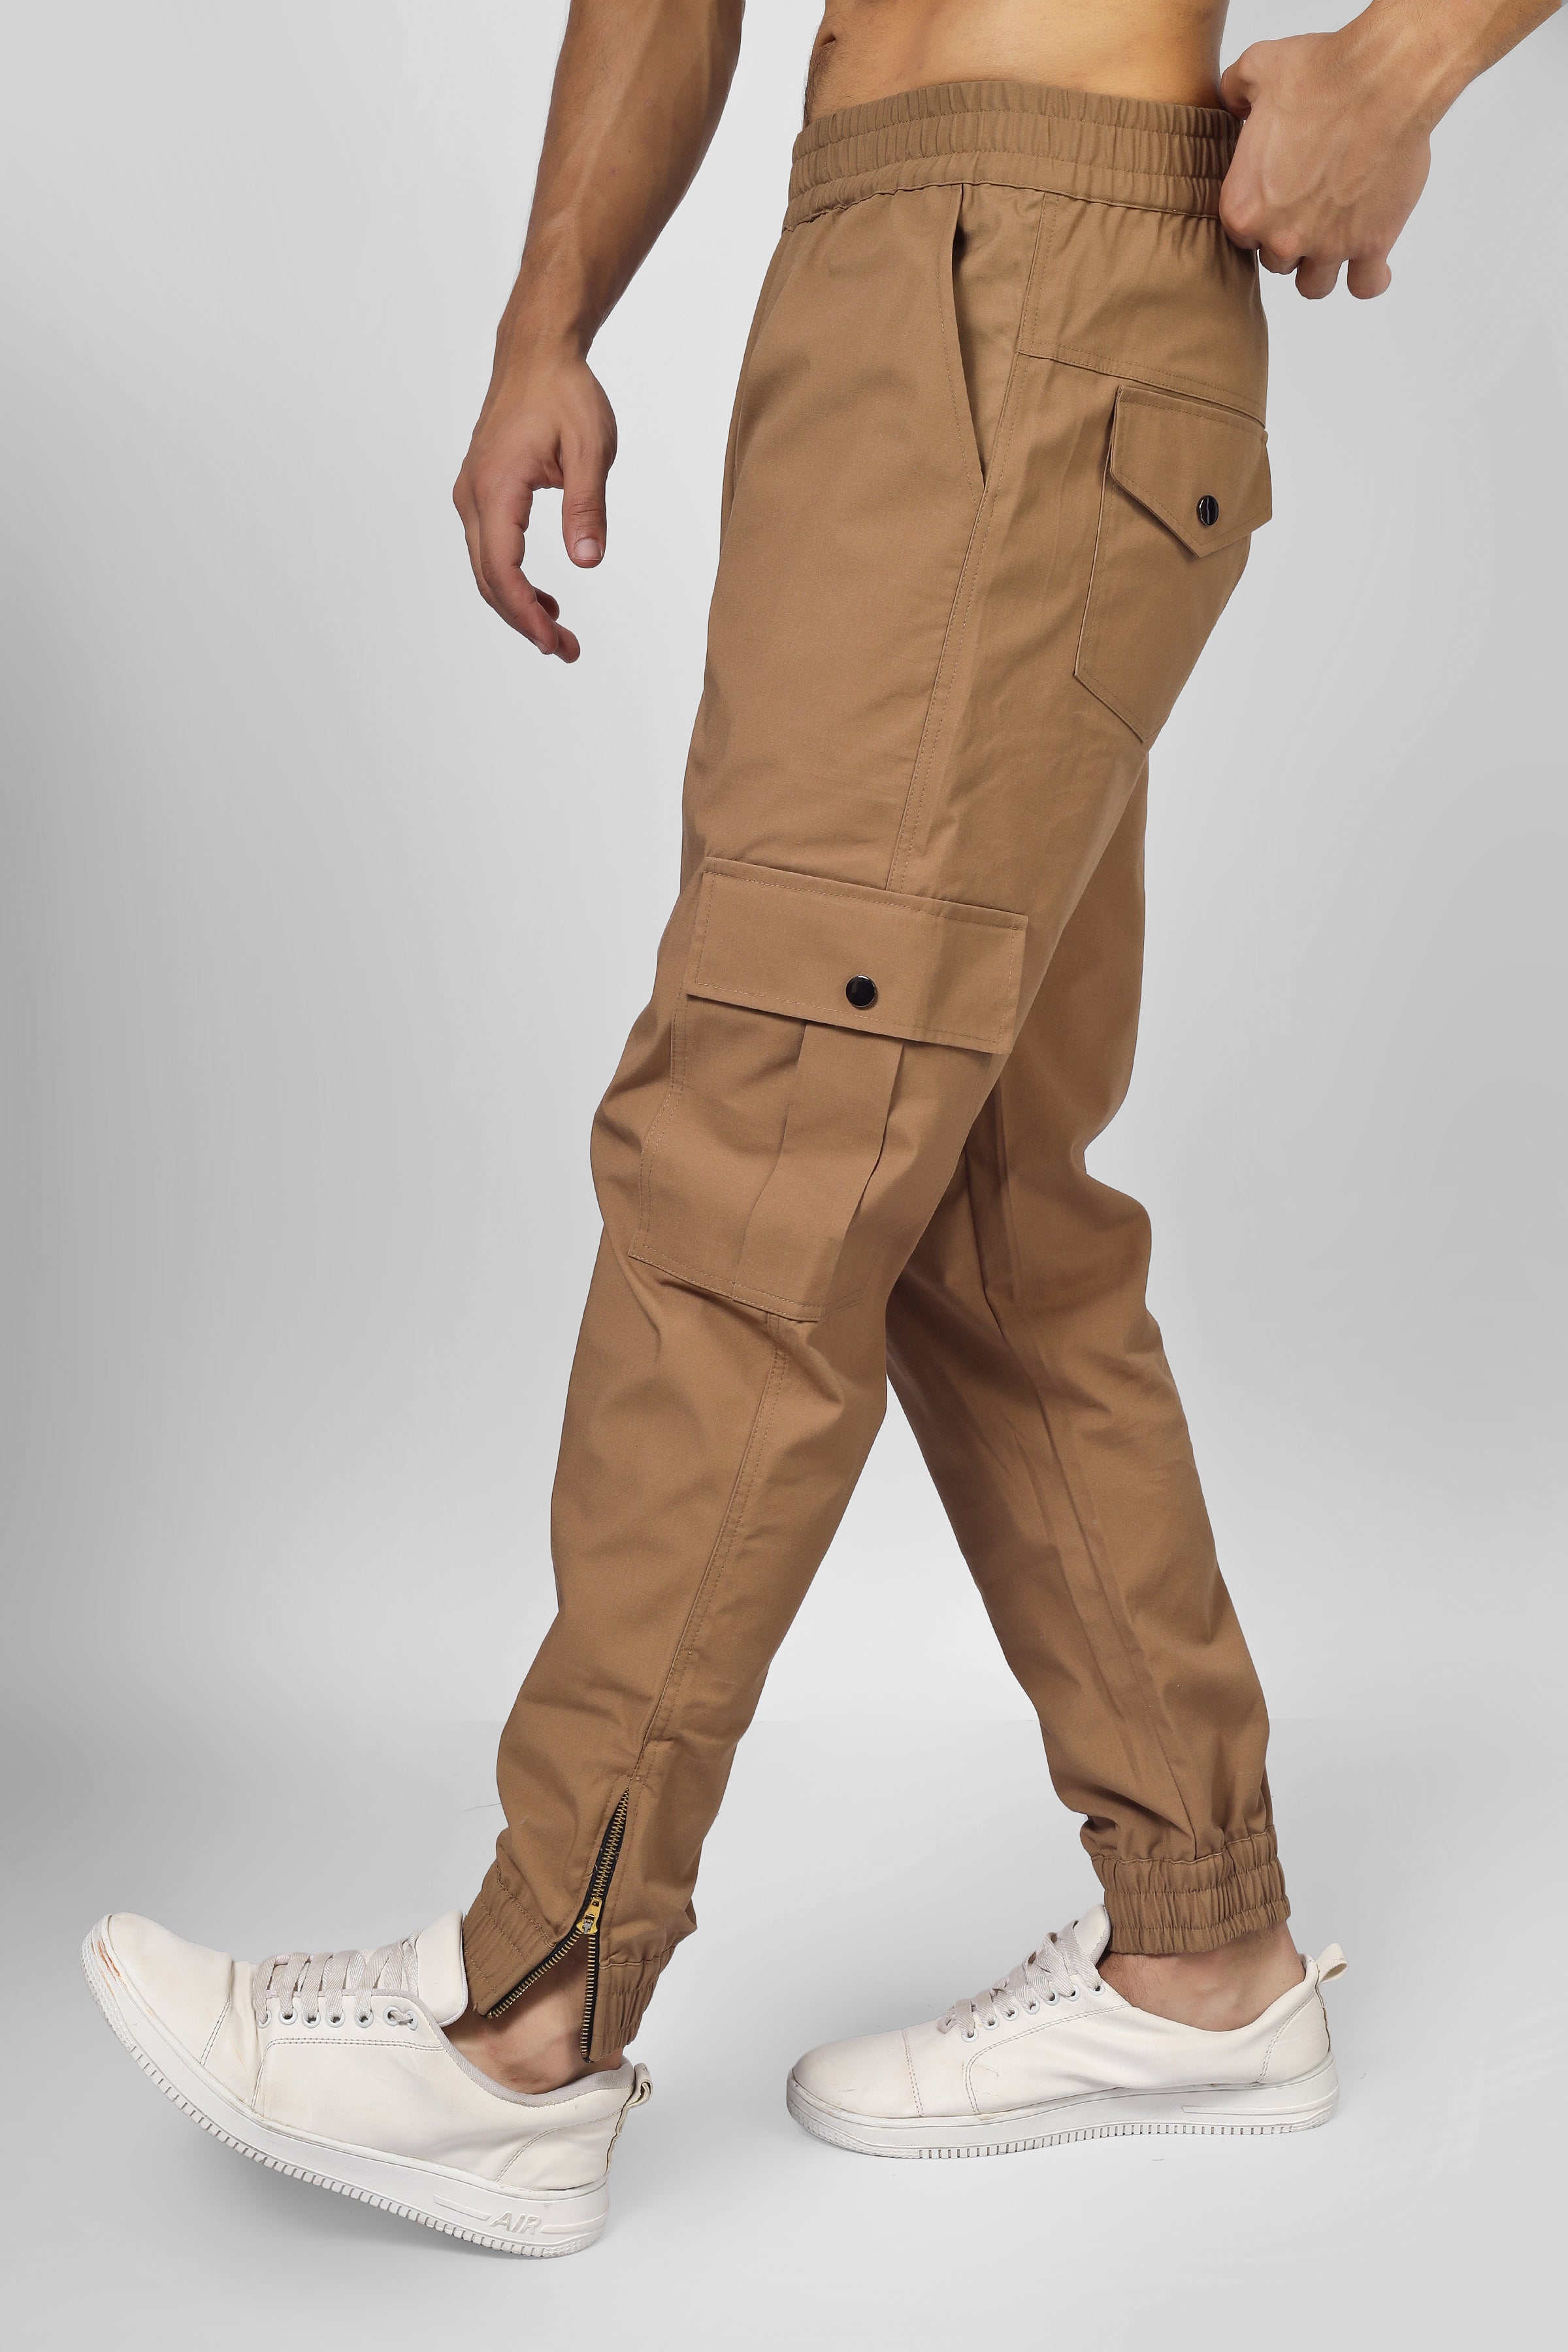 6 Pocket Cargo Design: Carry your essentials with ease. These trousers  feature 6 spacious pockets for your convenience. ✨All-Season Wear:… |  Instagram